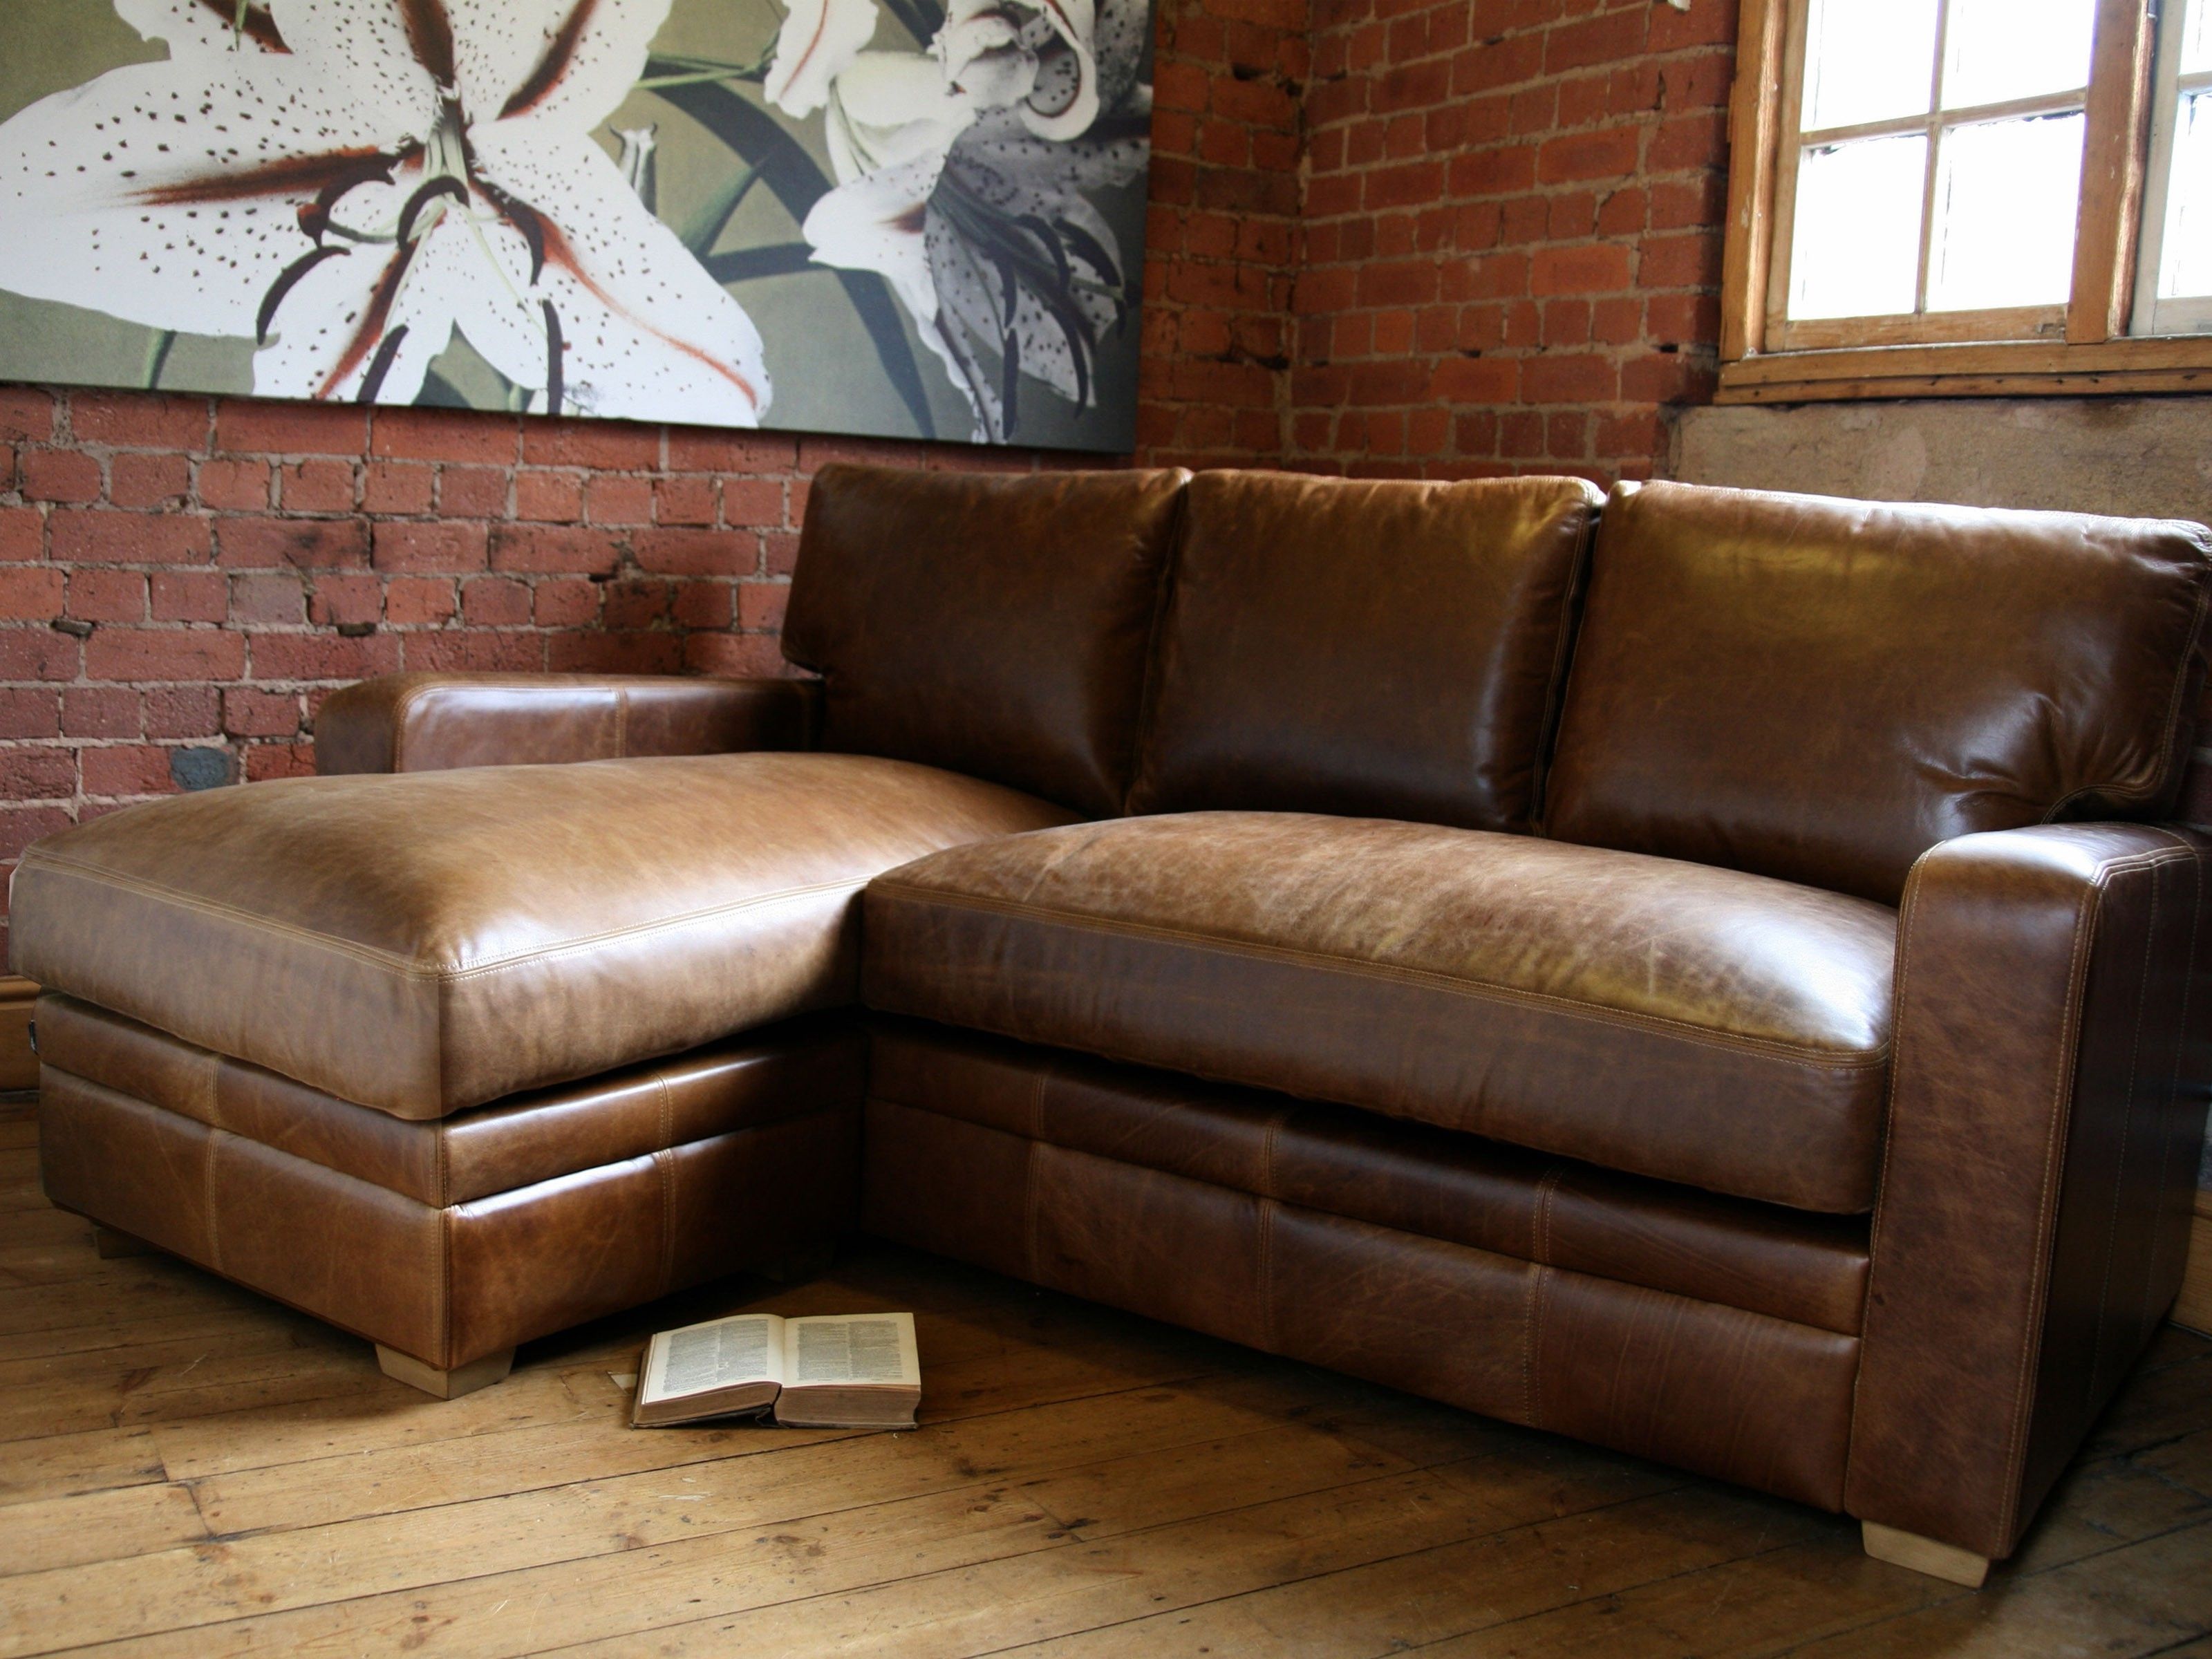 genuine leather sectional sofa with chaise natuzzi